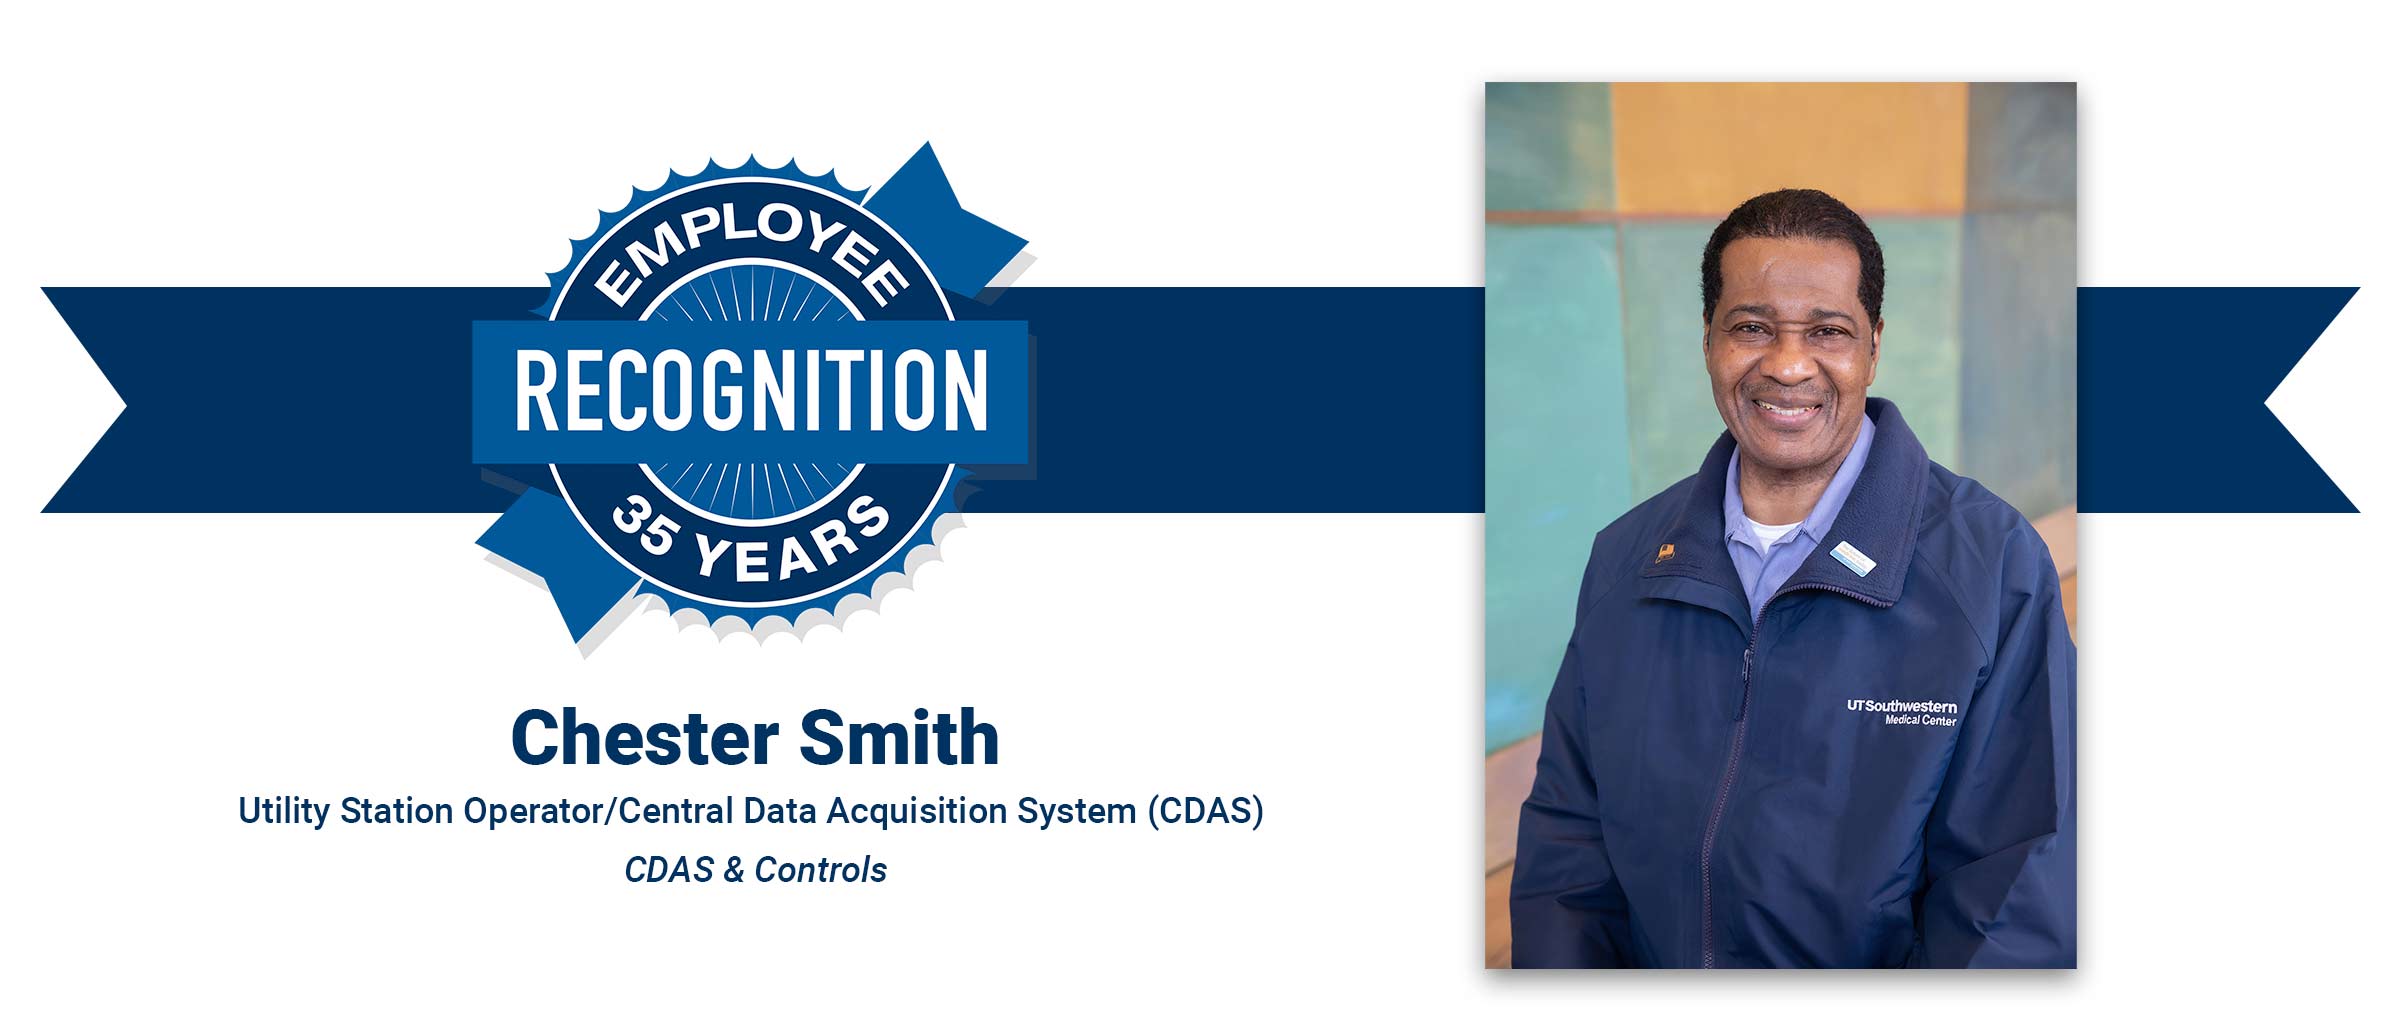 Chester Smith, photo of man, Employee Recognition 35 years emblem, Chester Smith, Utility Station Operator, CDAS & Control